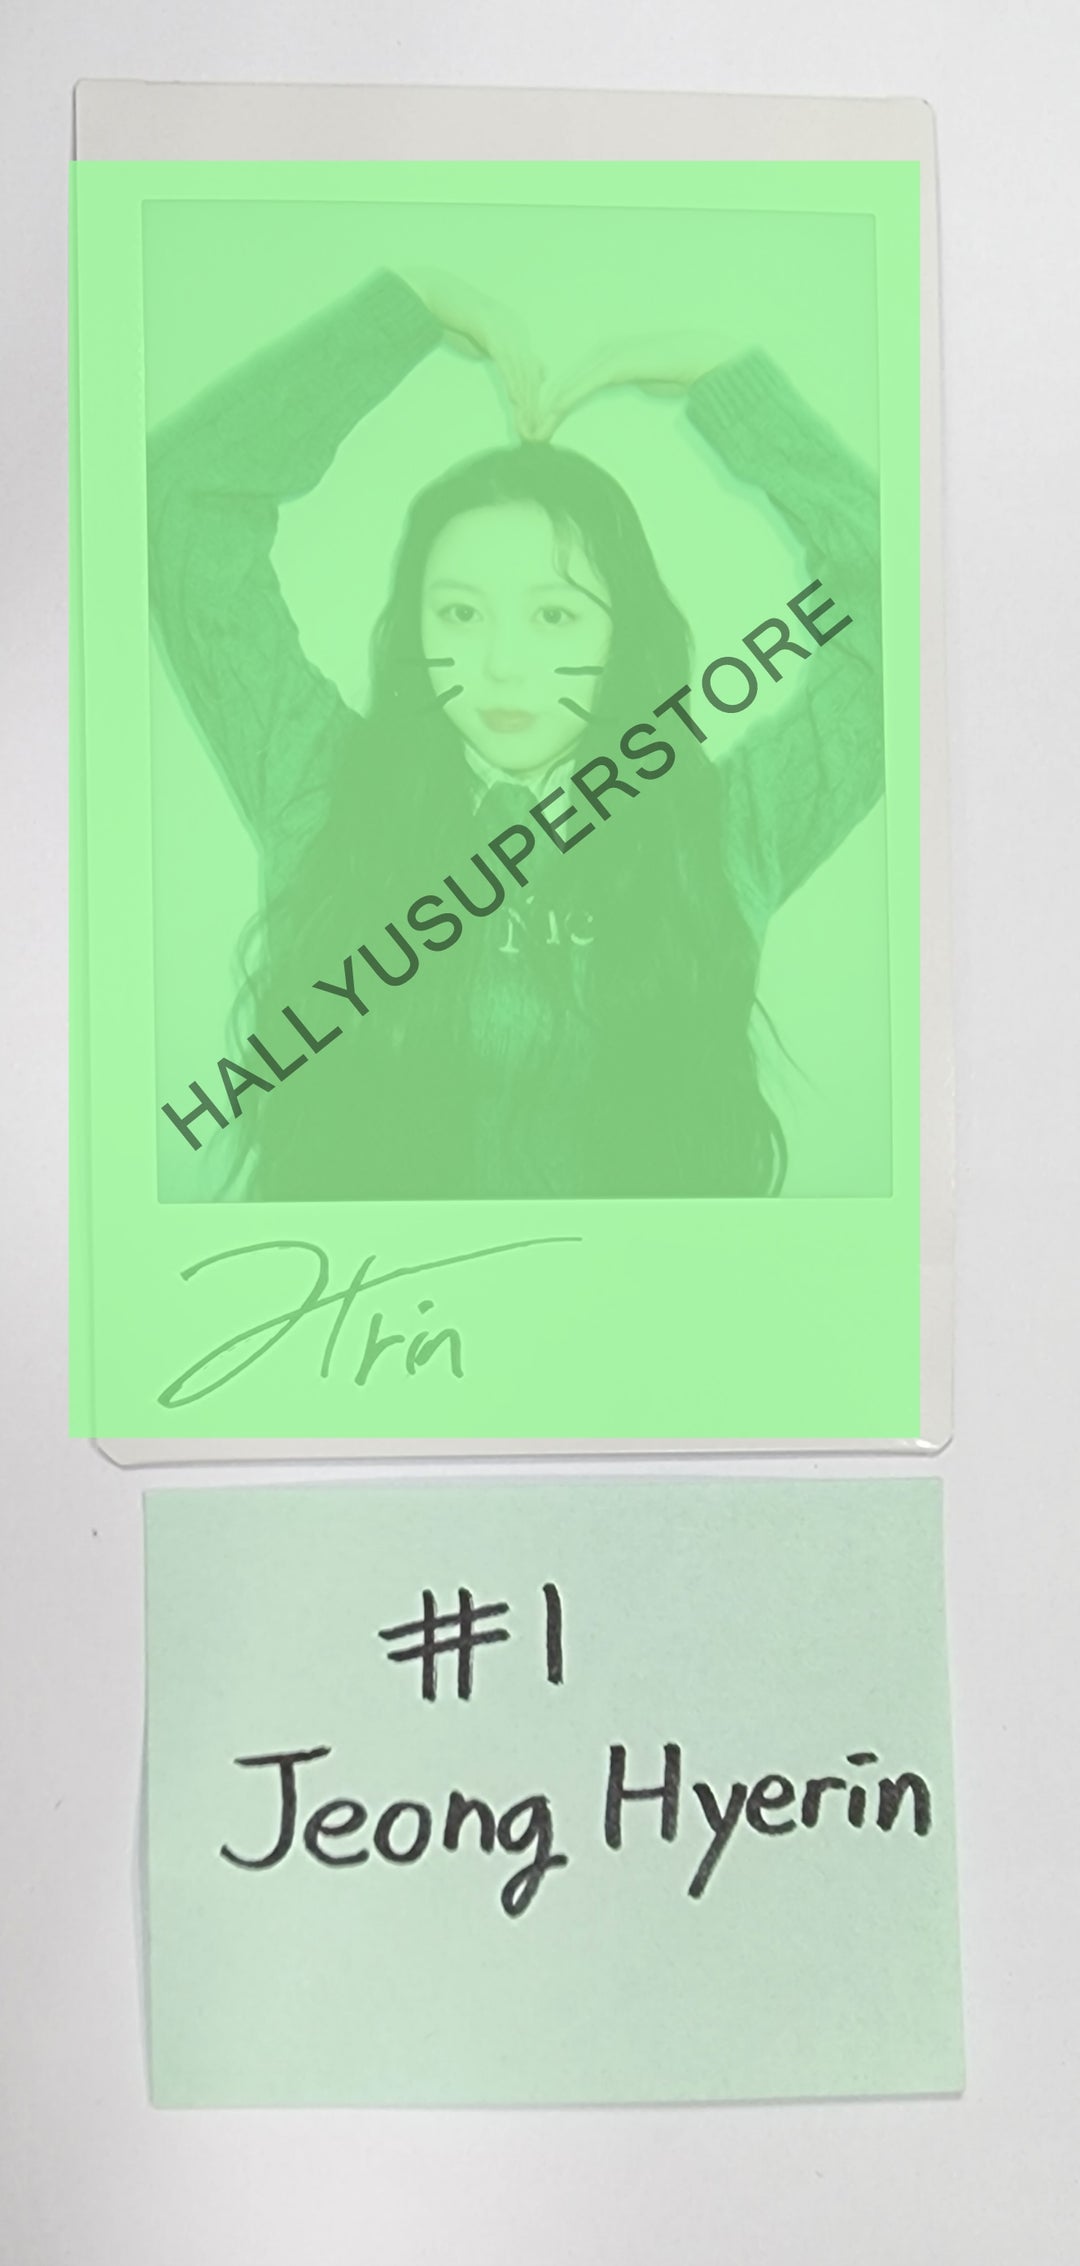 jeong heyrin (Of TripleS) "Acid Angel from Asia" - Hand Autographed(Signed) Polaroid